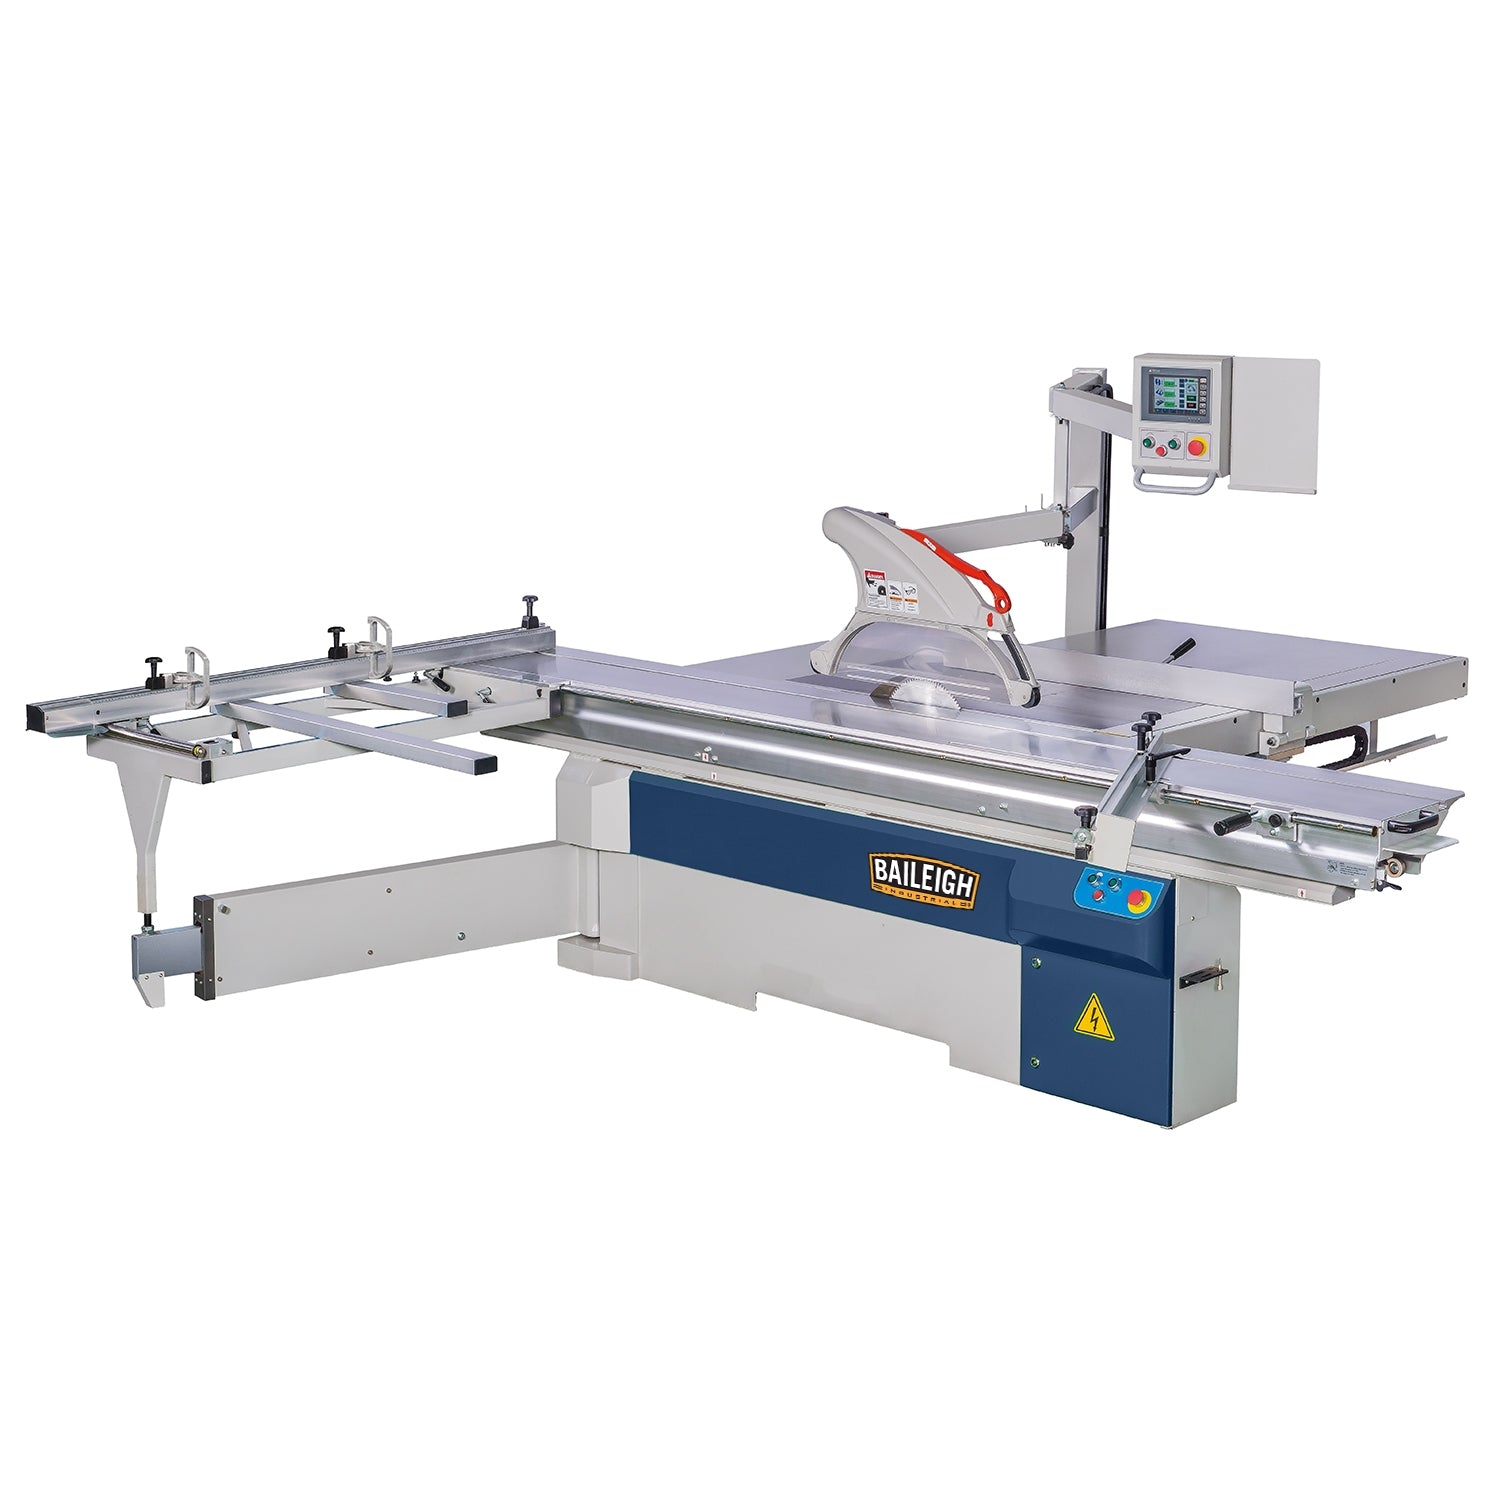 Baileigh STS-16120-CNC 220V 3 Phase 7.5 hp 16" CNC Sliding Table Saw